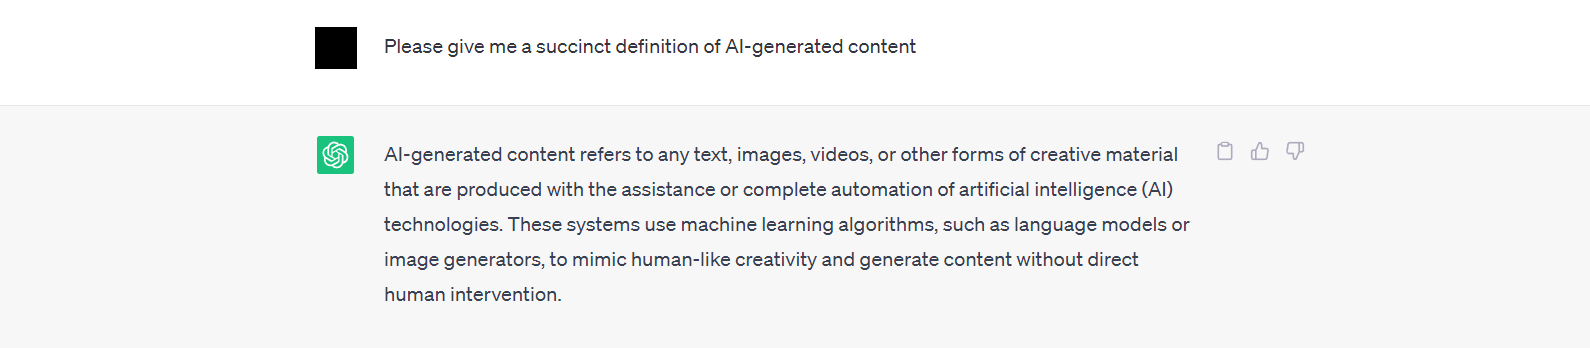 ChatGPT answering 'what is AI-generated content?'